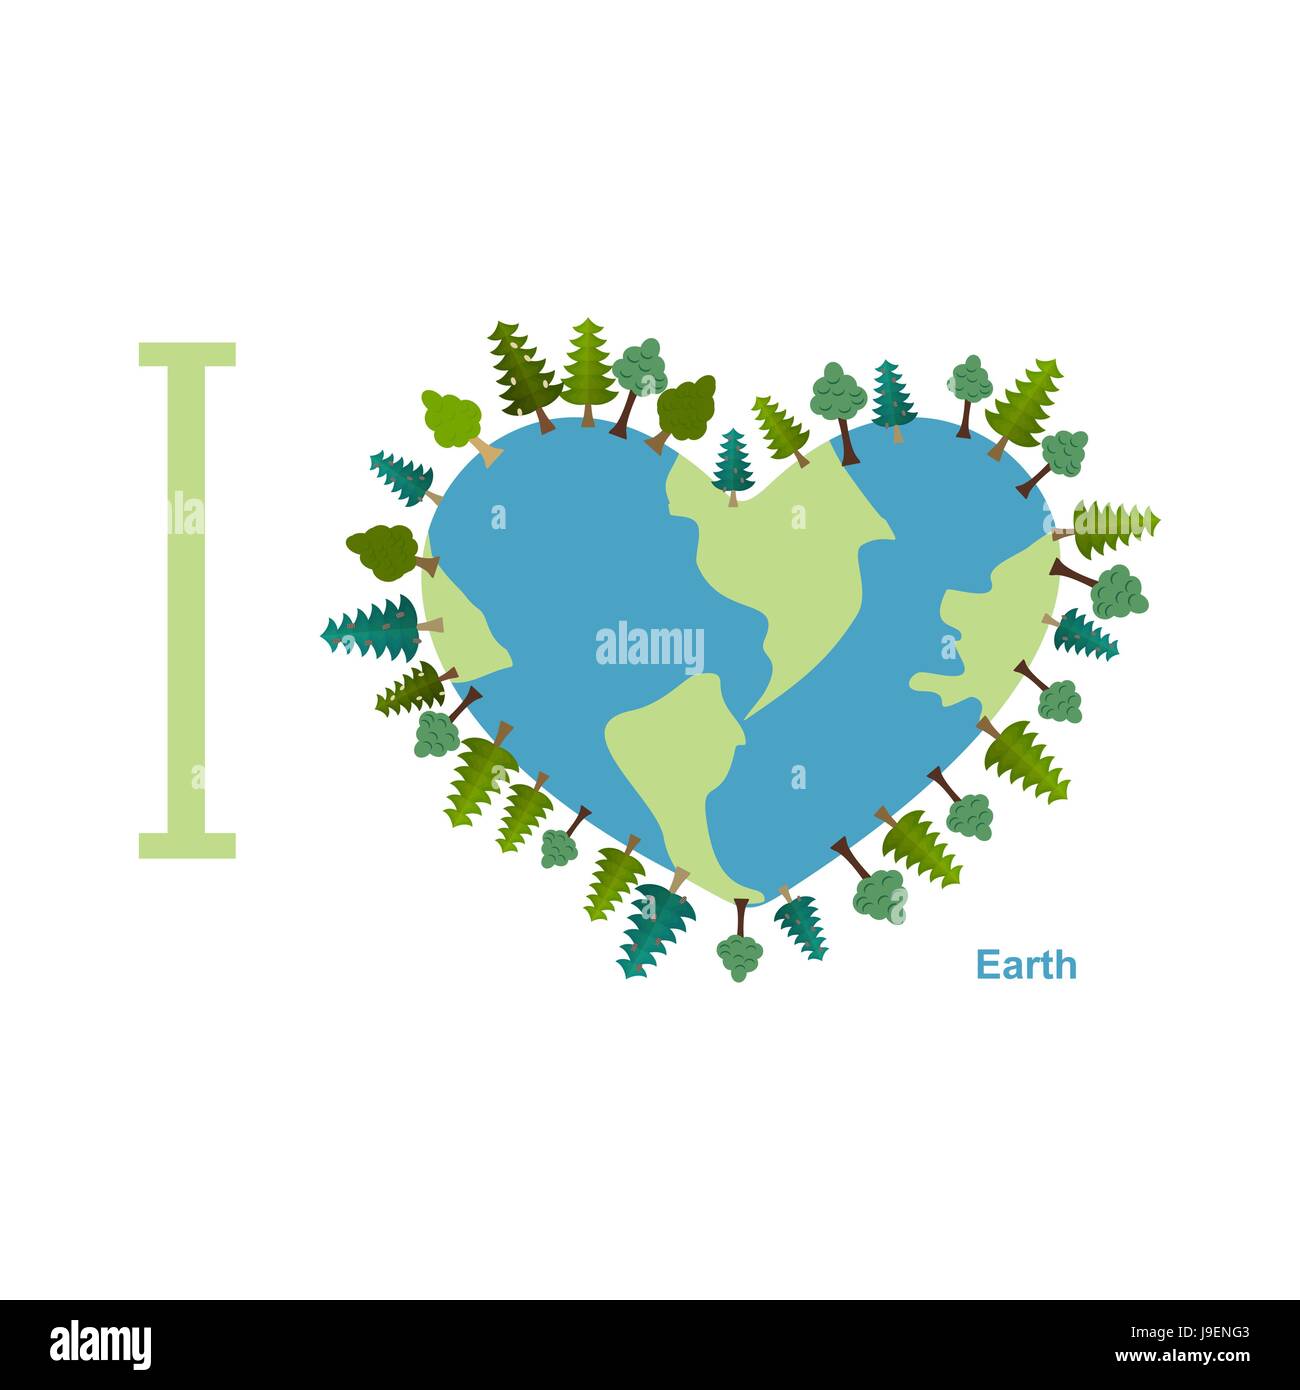 I love Earth. Planet sweetheart with trees. Vector illustration for earth day. Stock Vector